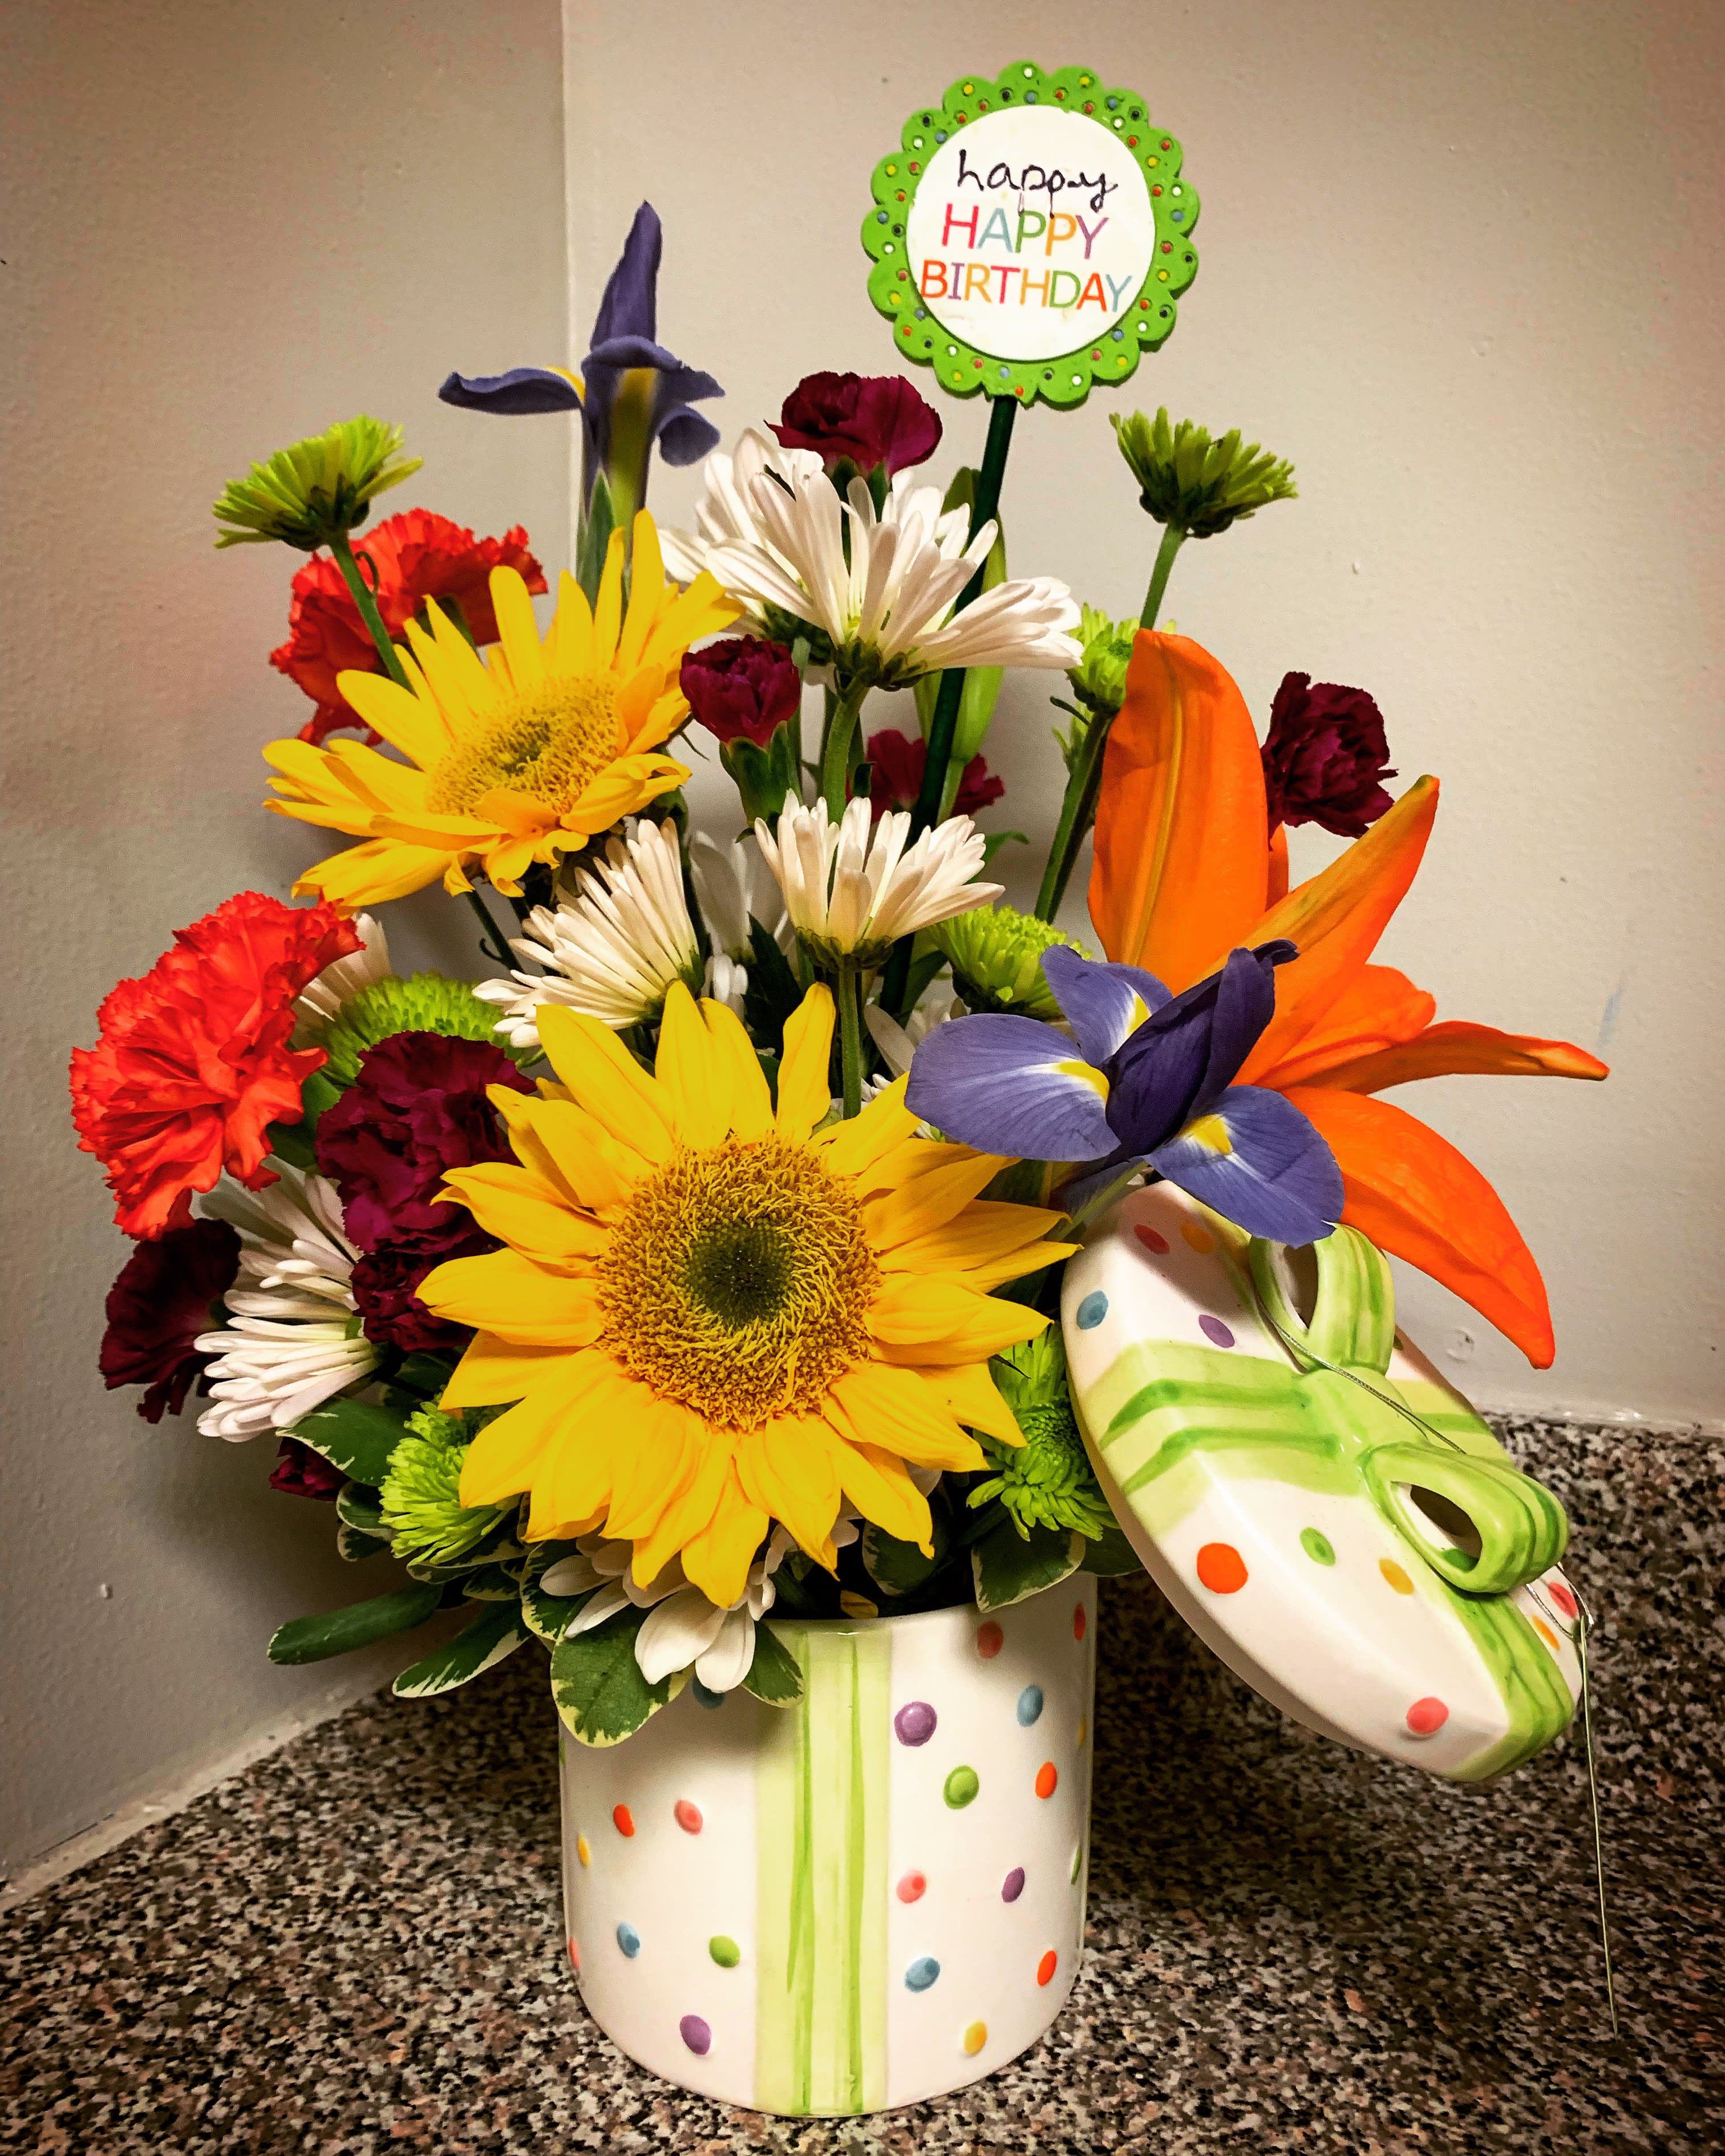 Birthday Package Bouquet in Cherry Hill, NJ | Jacqueline's Flowers & Gifts